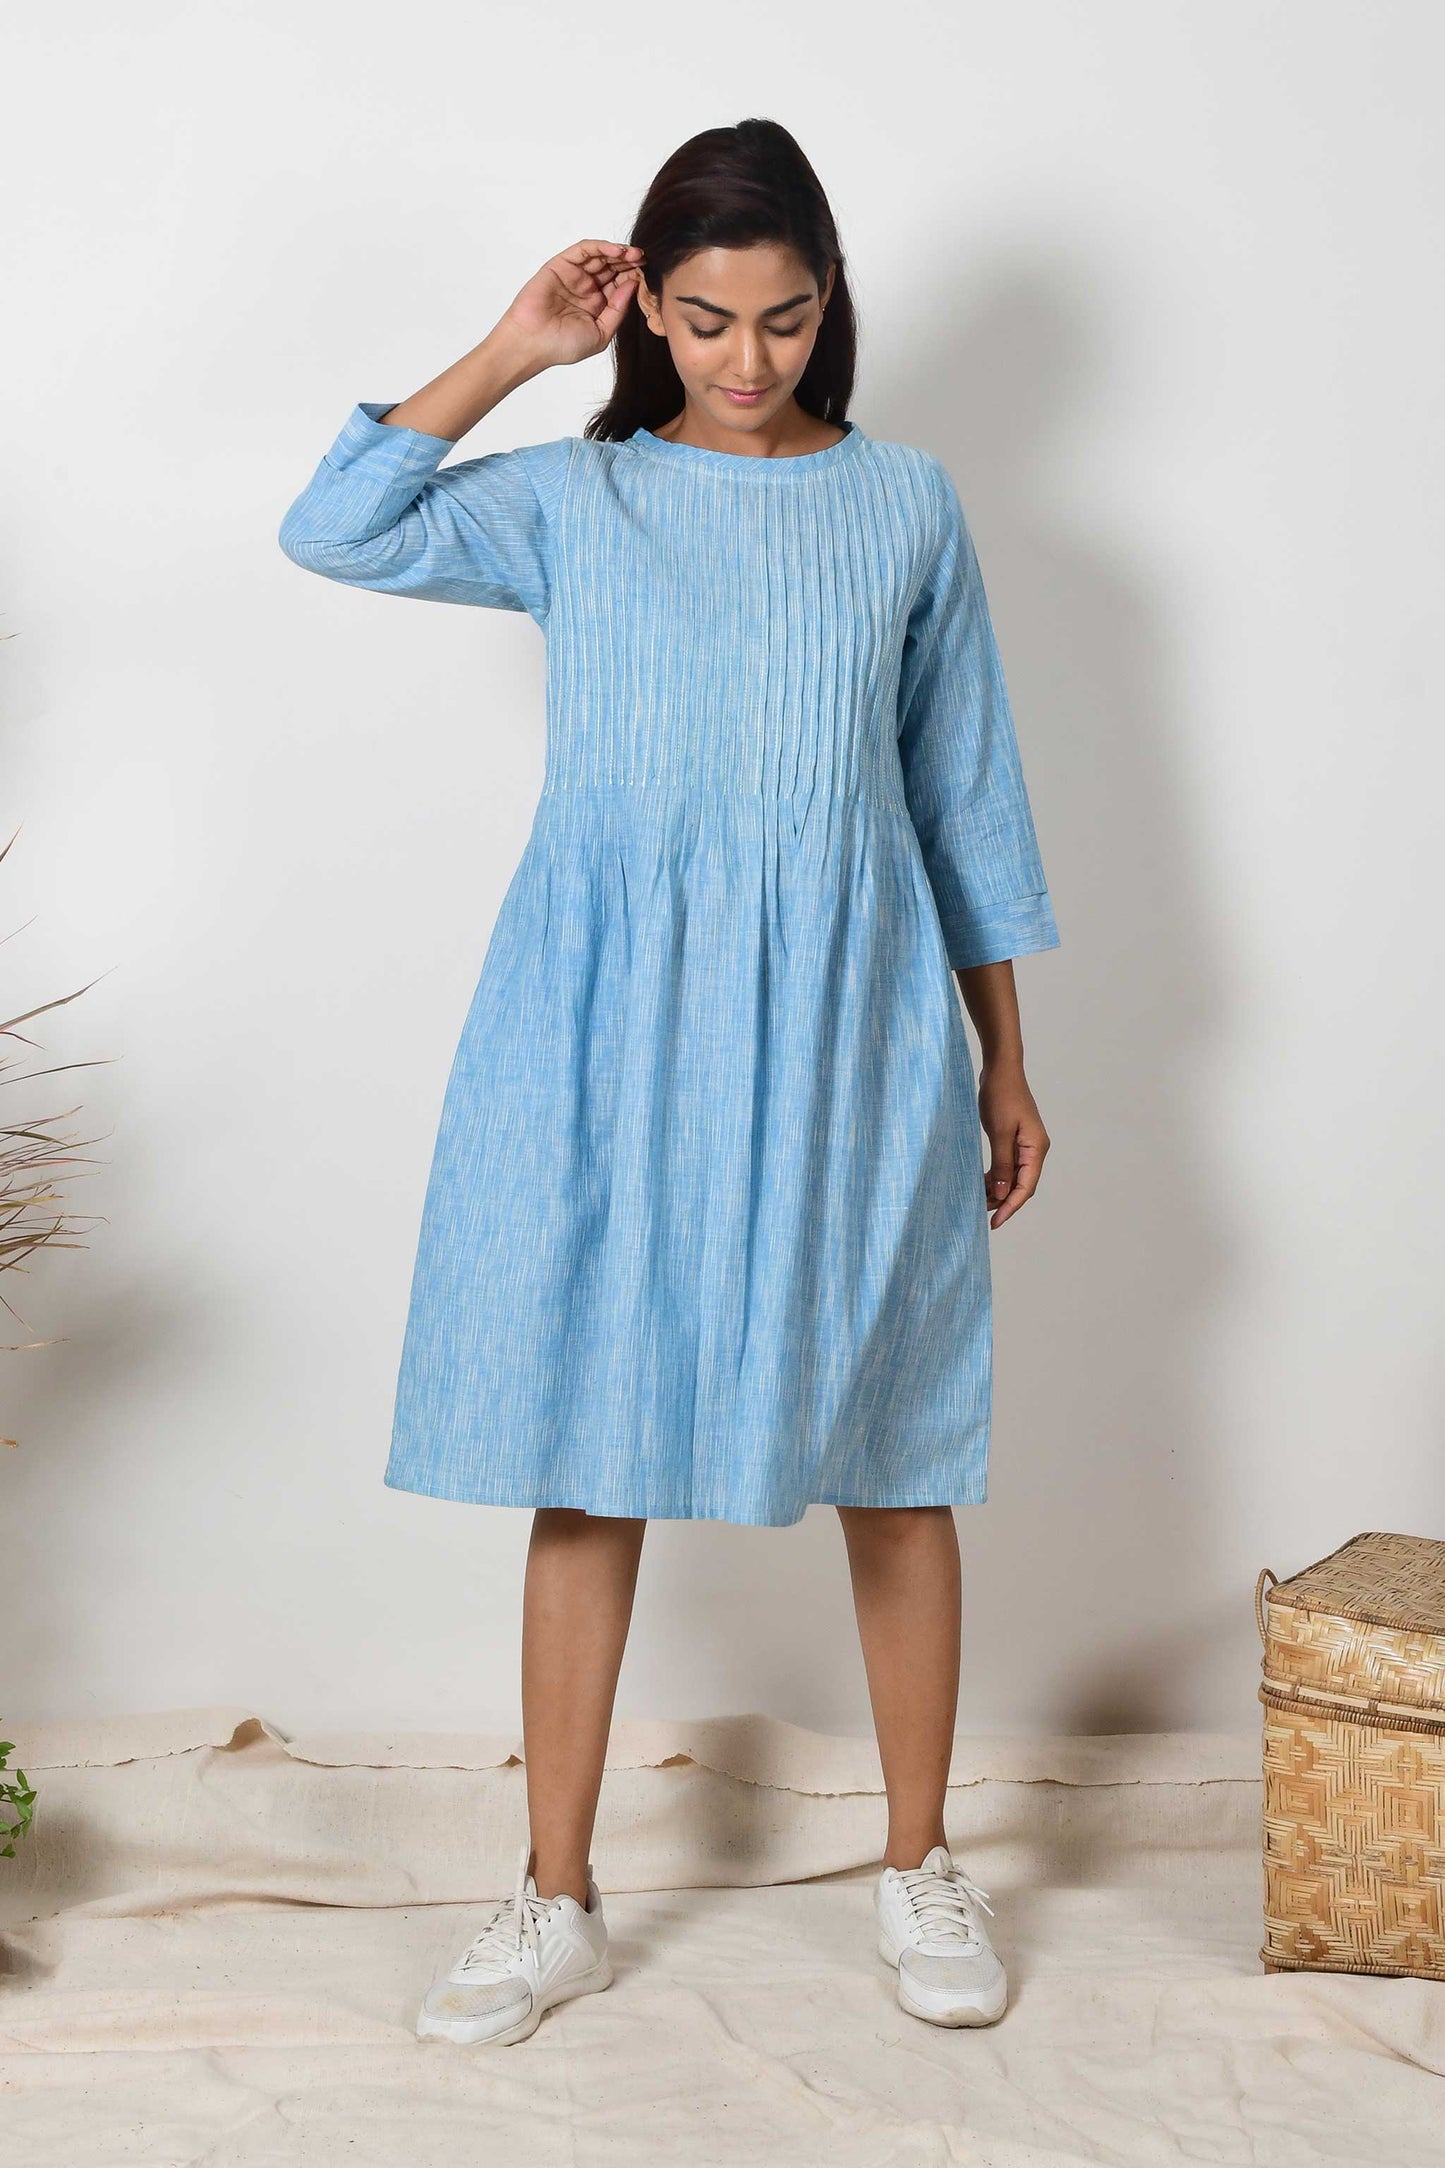 indian girl model wearing a pair of white sneakers and sky blue cotton pleated kurta dress with sleeves.